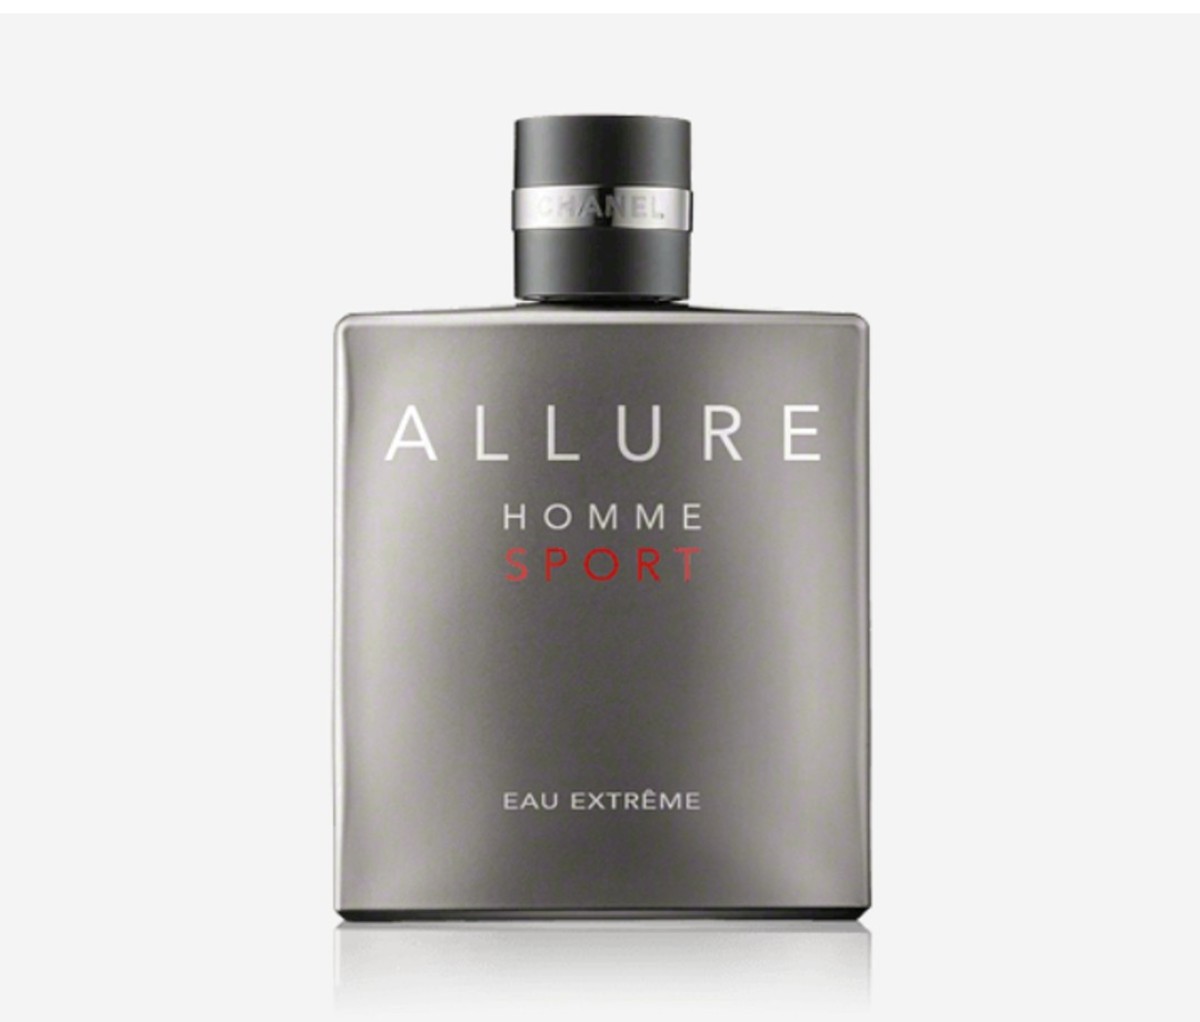 Духи allure homme. Chanel Allure homme Sport extreme. Chanel Allure homme Sport. Allure homme Sport Eau extreme. Chanel Allure homme Sport Cologne 3*20.